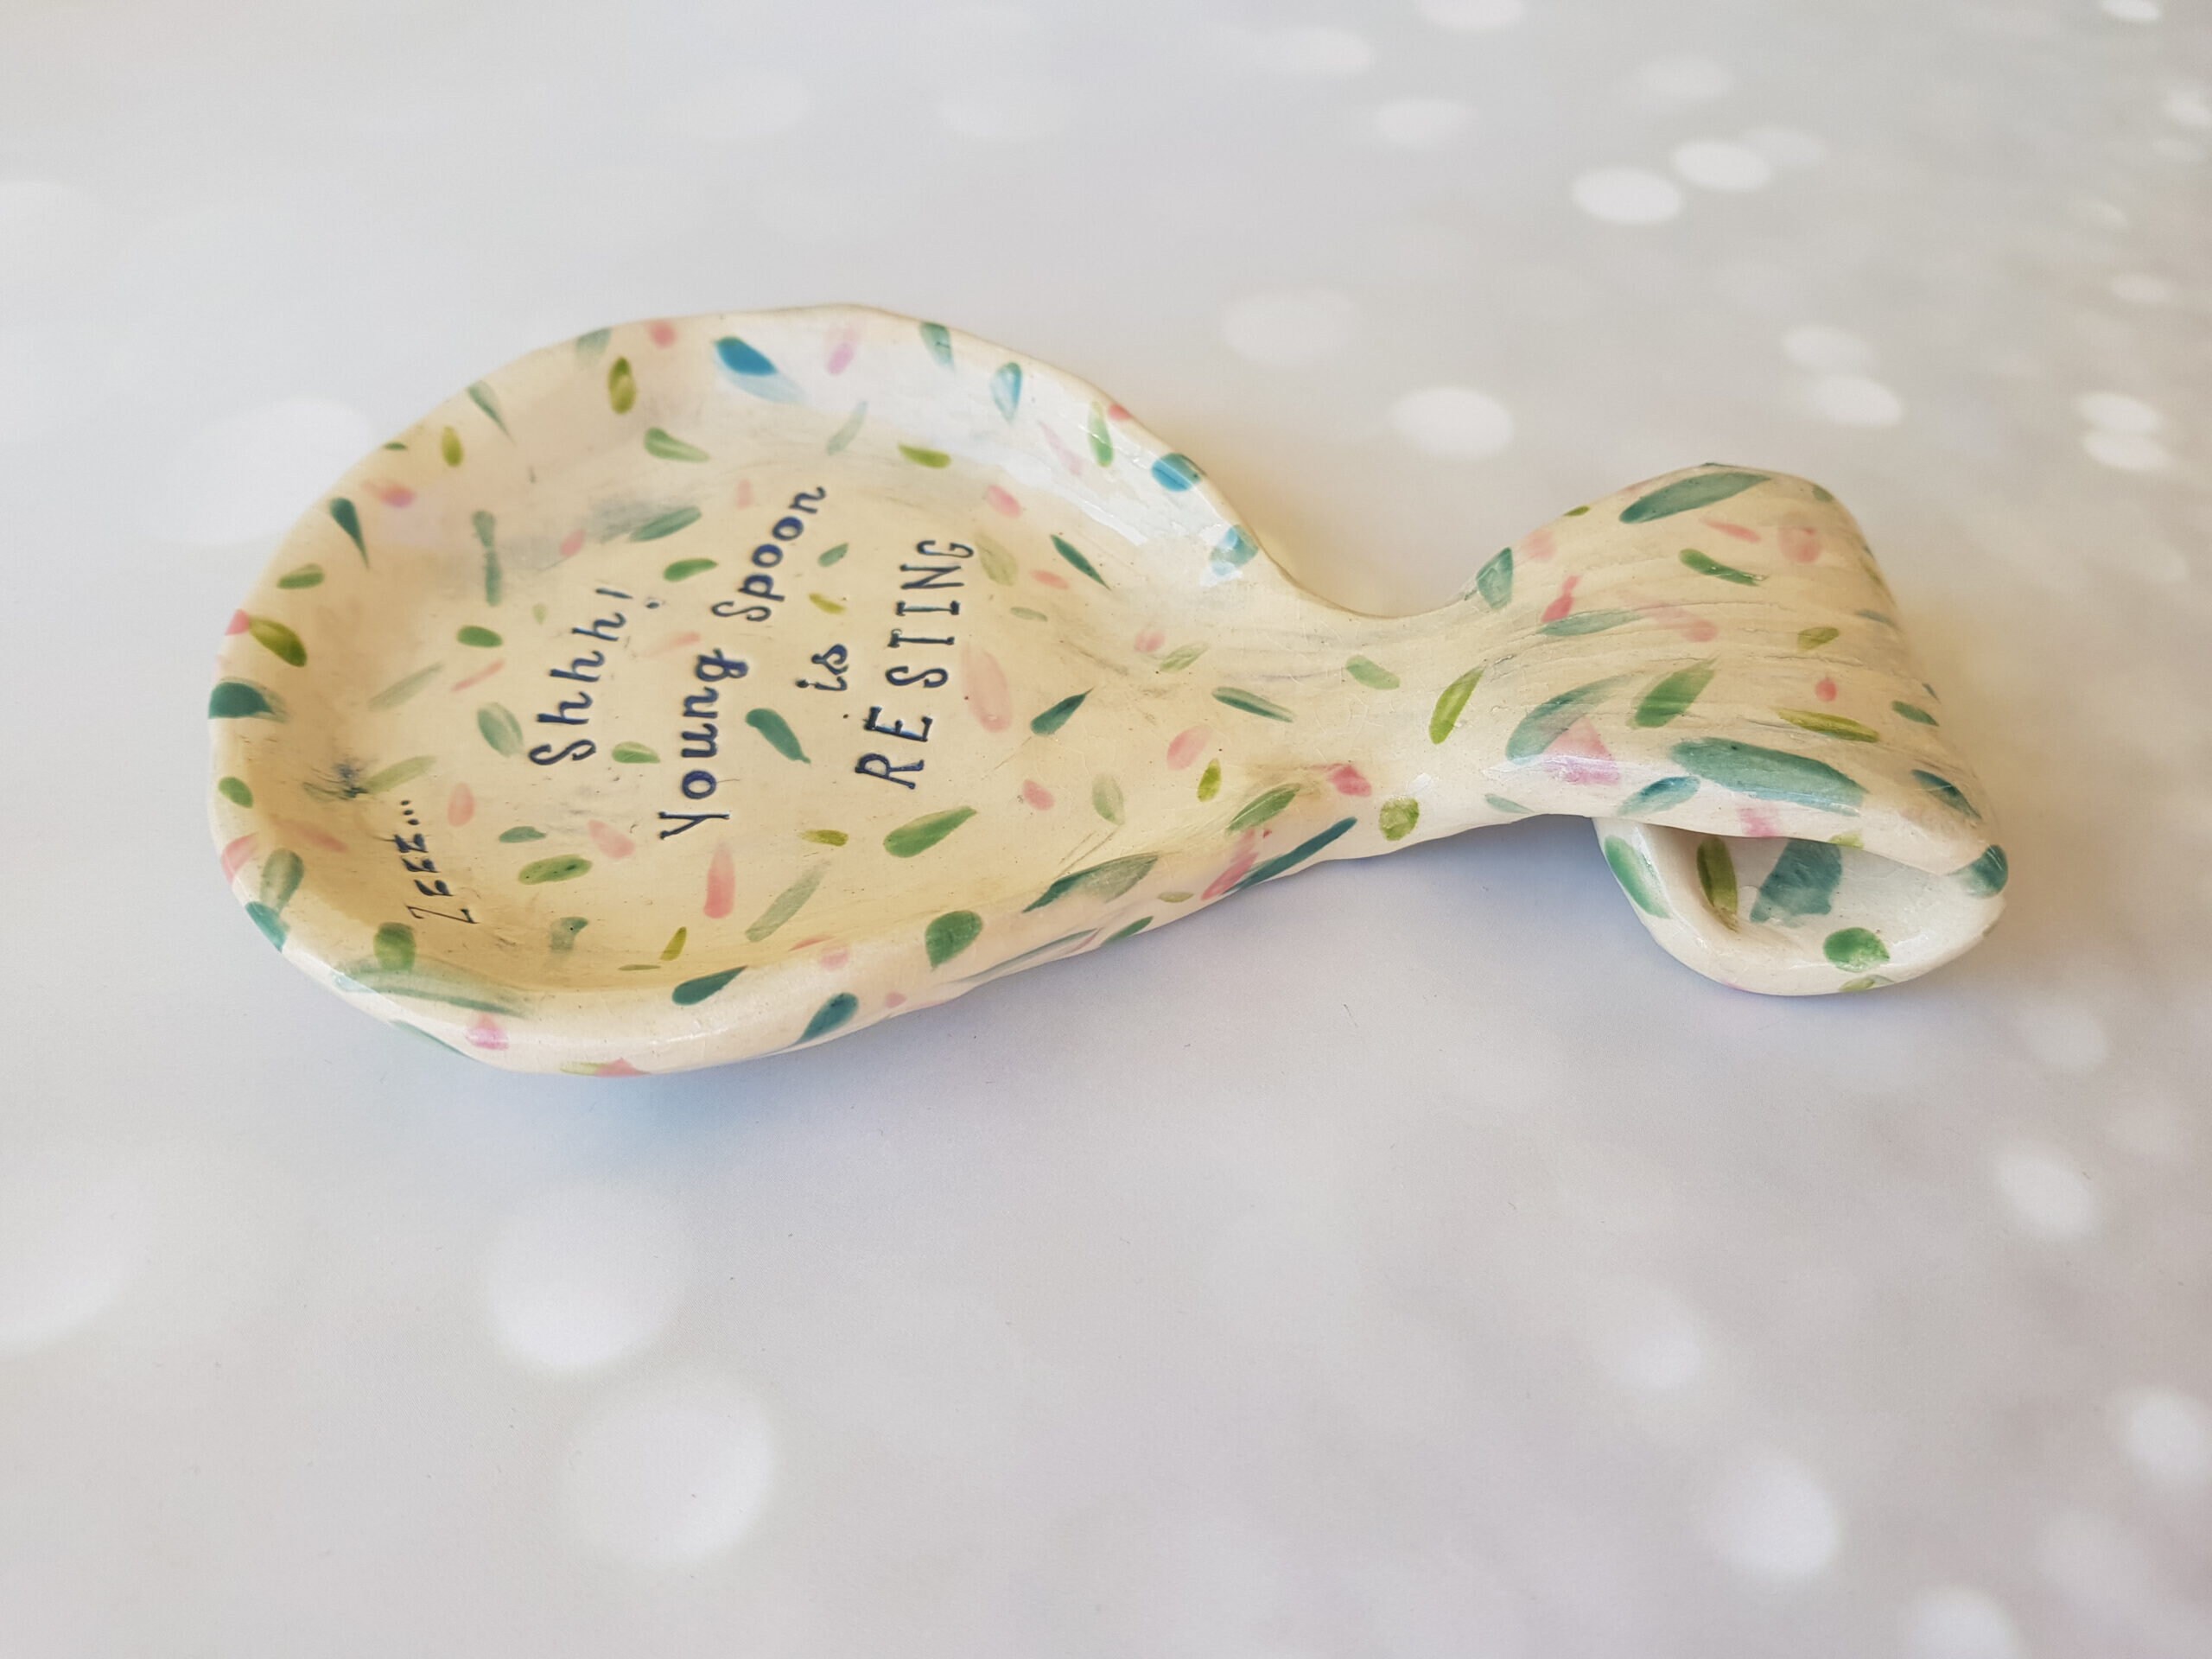 Humorous Pastel Colors Quirky Spoon Rest